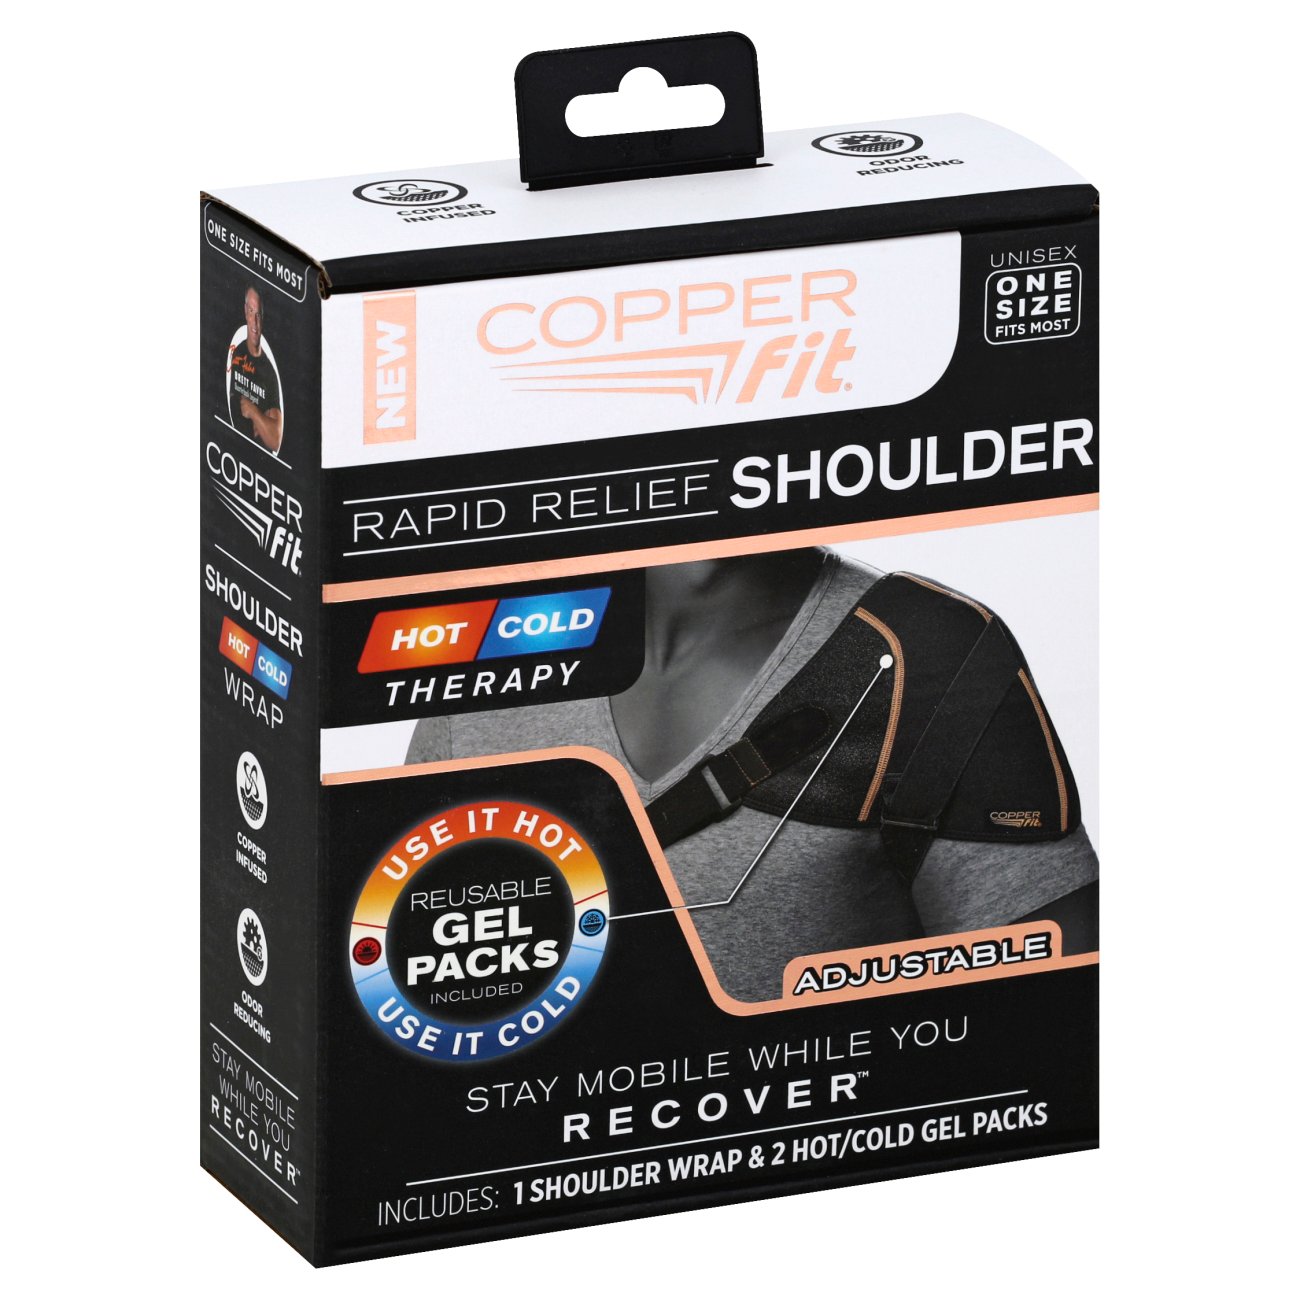 Copper Fit Rapid Relief Wraps – How To Use for Right Shoulder